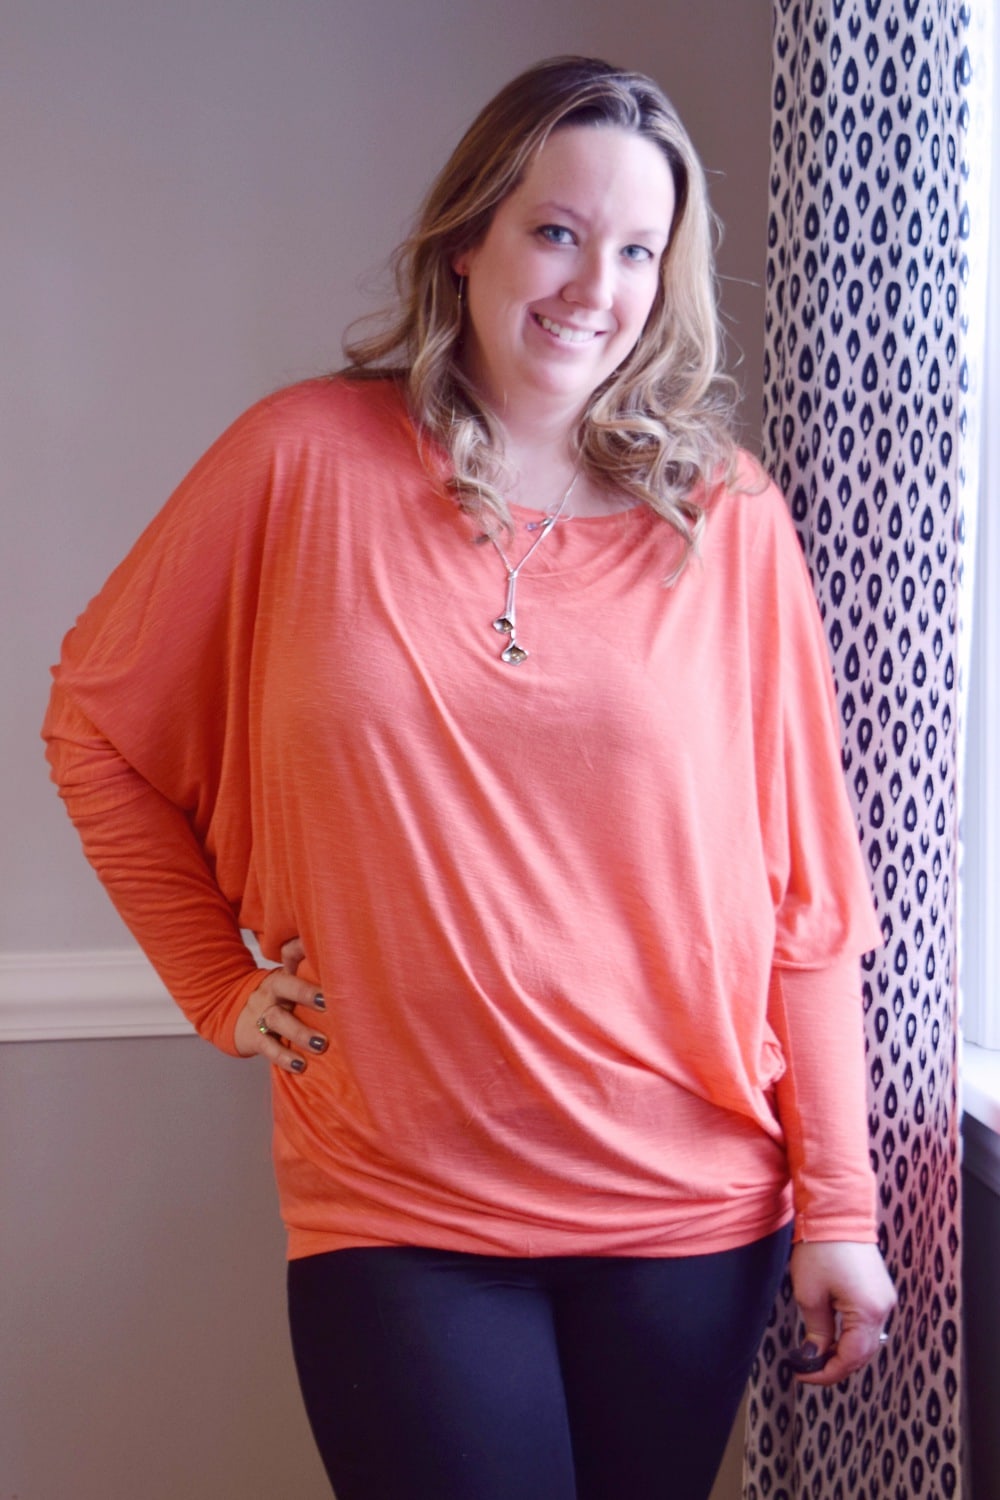 It’s dreamy, it’s drapey, and it’s easy to sew... the Dreamy Drape Top is a ladies batwing top sewing pattern that's super comfy and totally on-trend.